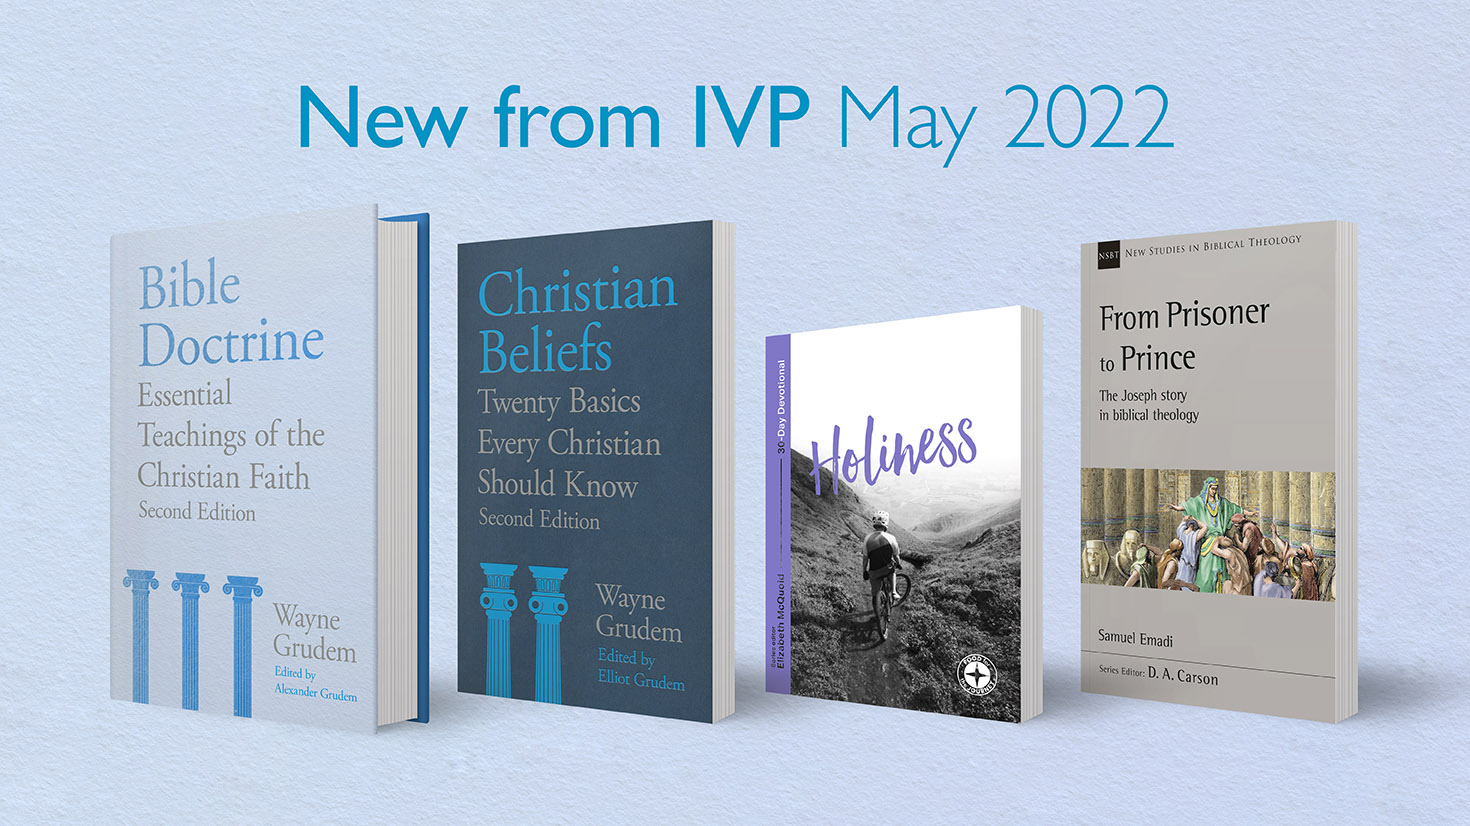 The IVP May 2022 Releases